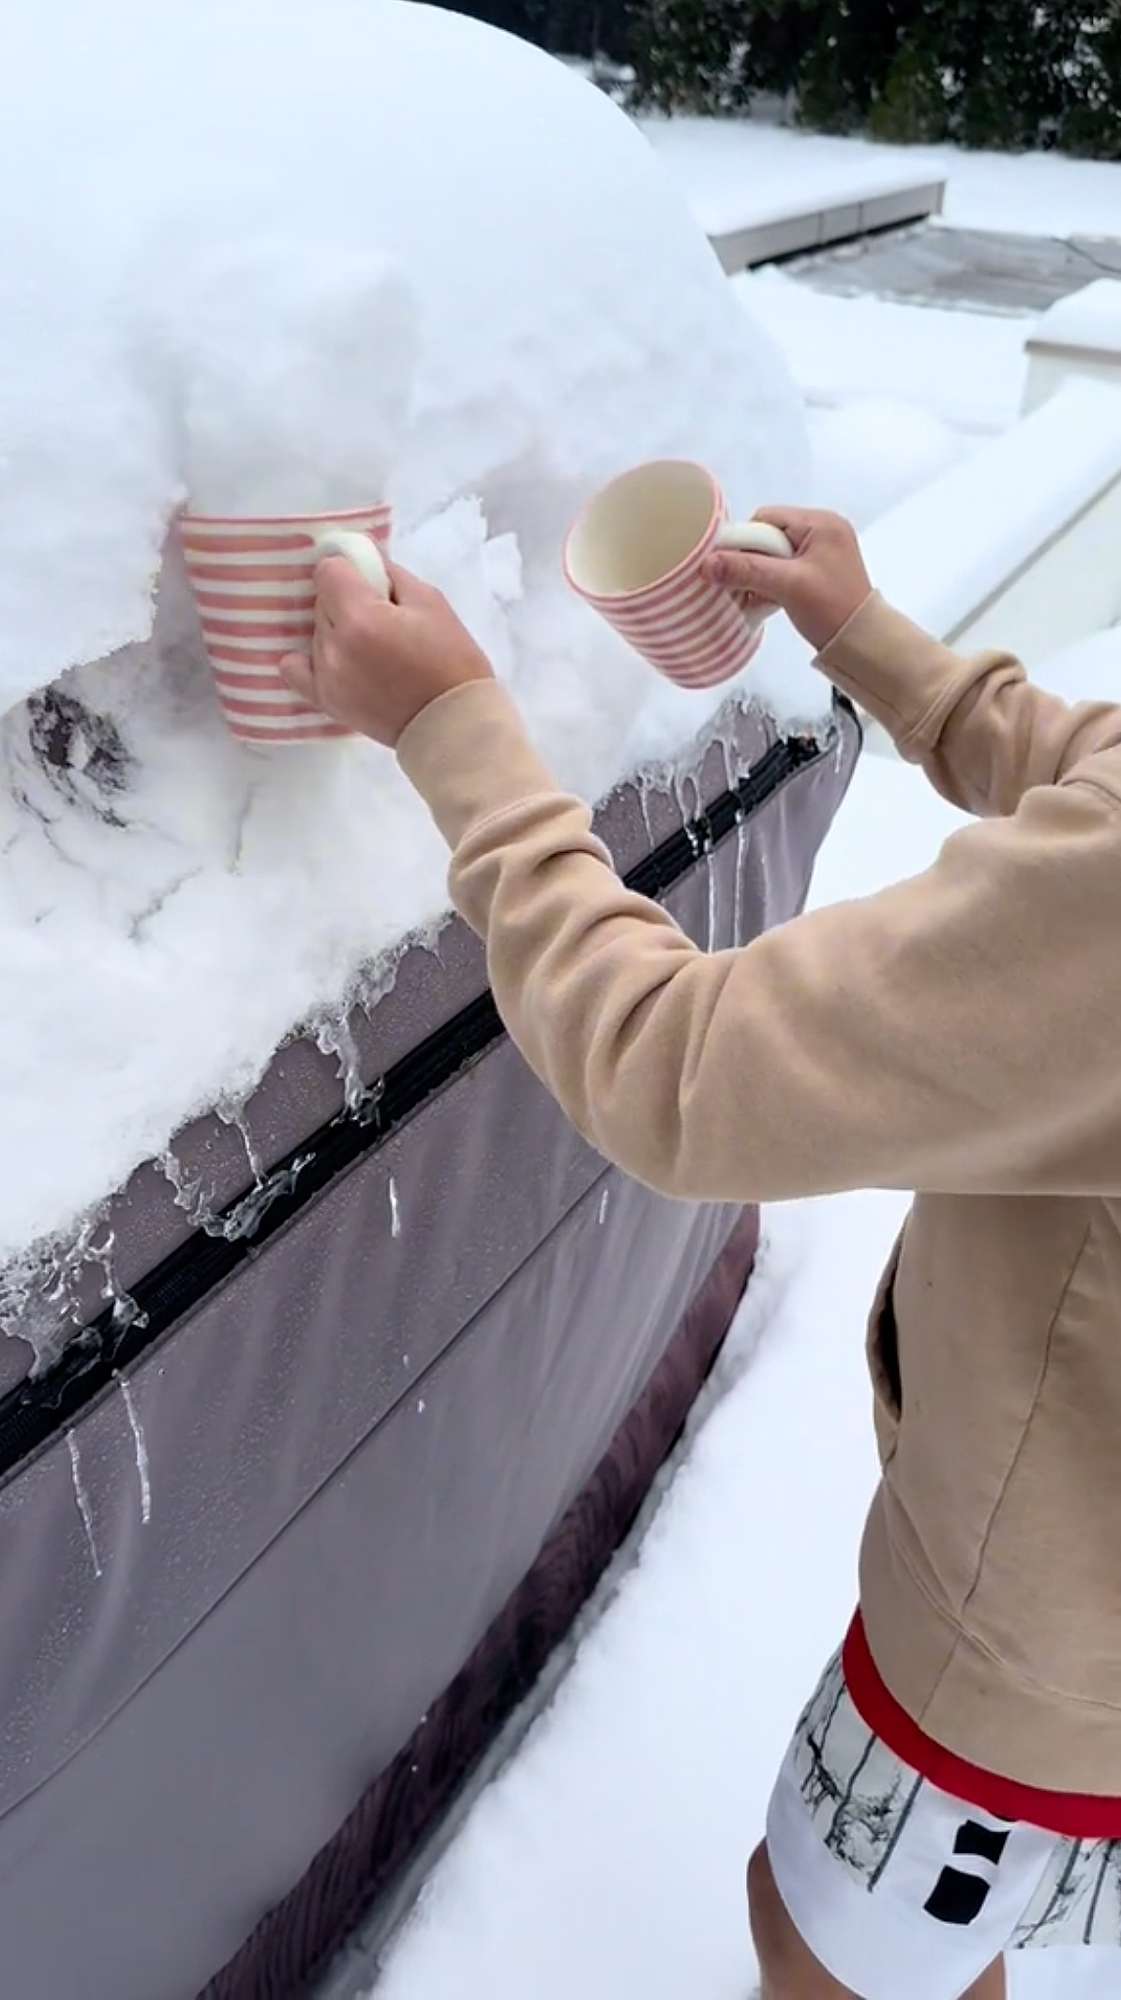 Reese Witherspoon Defends Her Choice to Eat Snow After TikTok Recipe Video Sparks Heated Debate